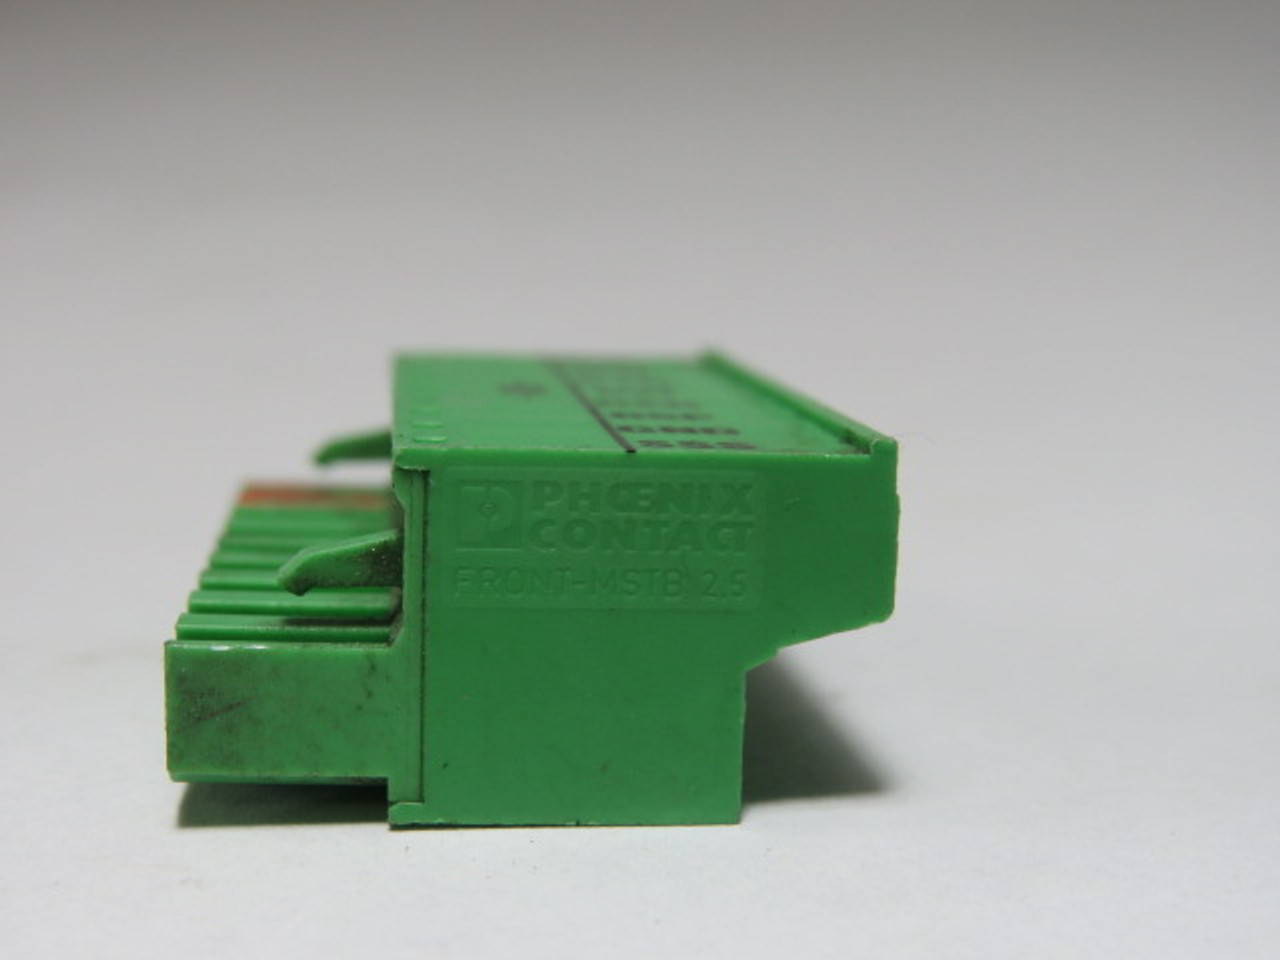 Phoenix Contact FRONT-MSTB2.5/9-ST PC Board Connector 9-Pos GREEN USED